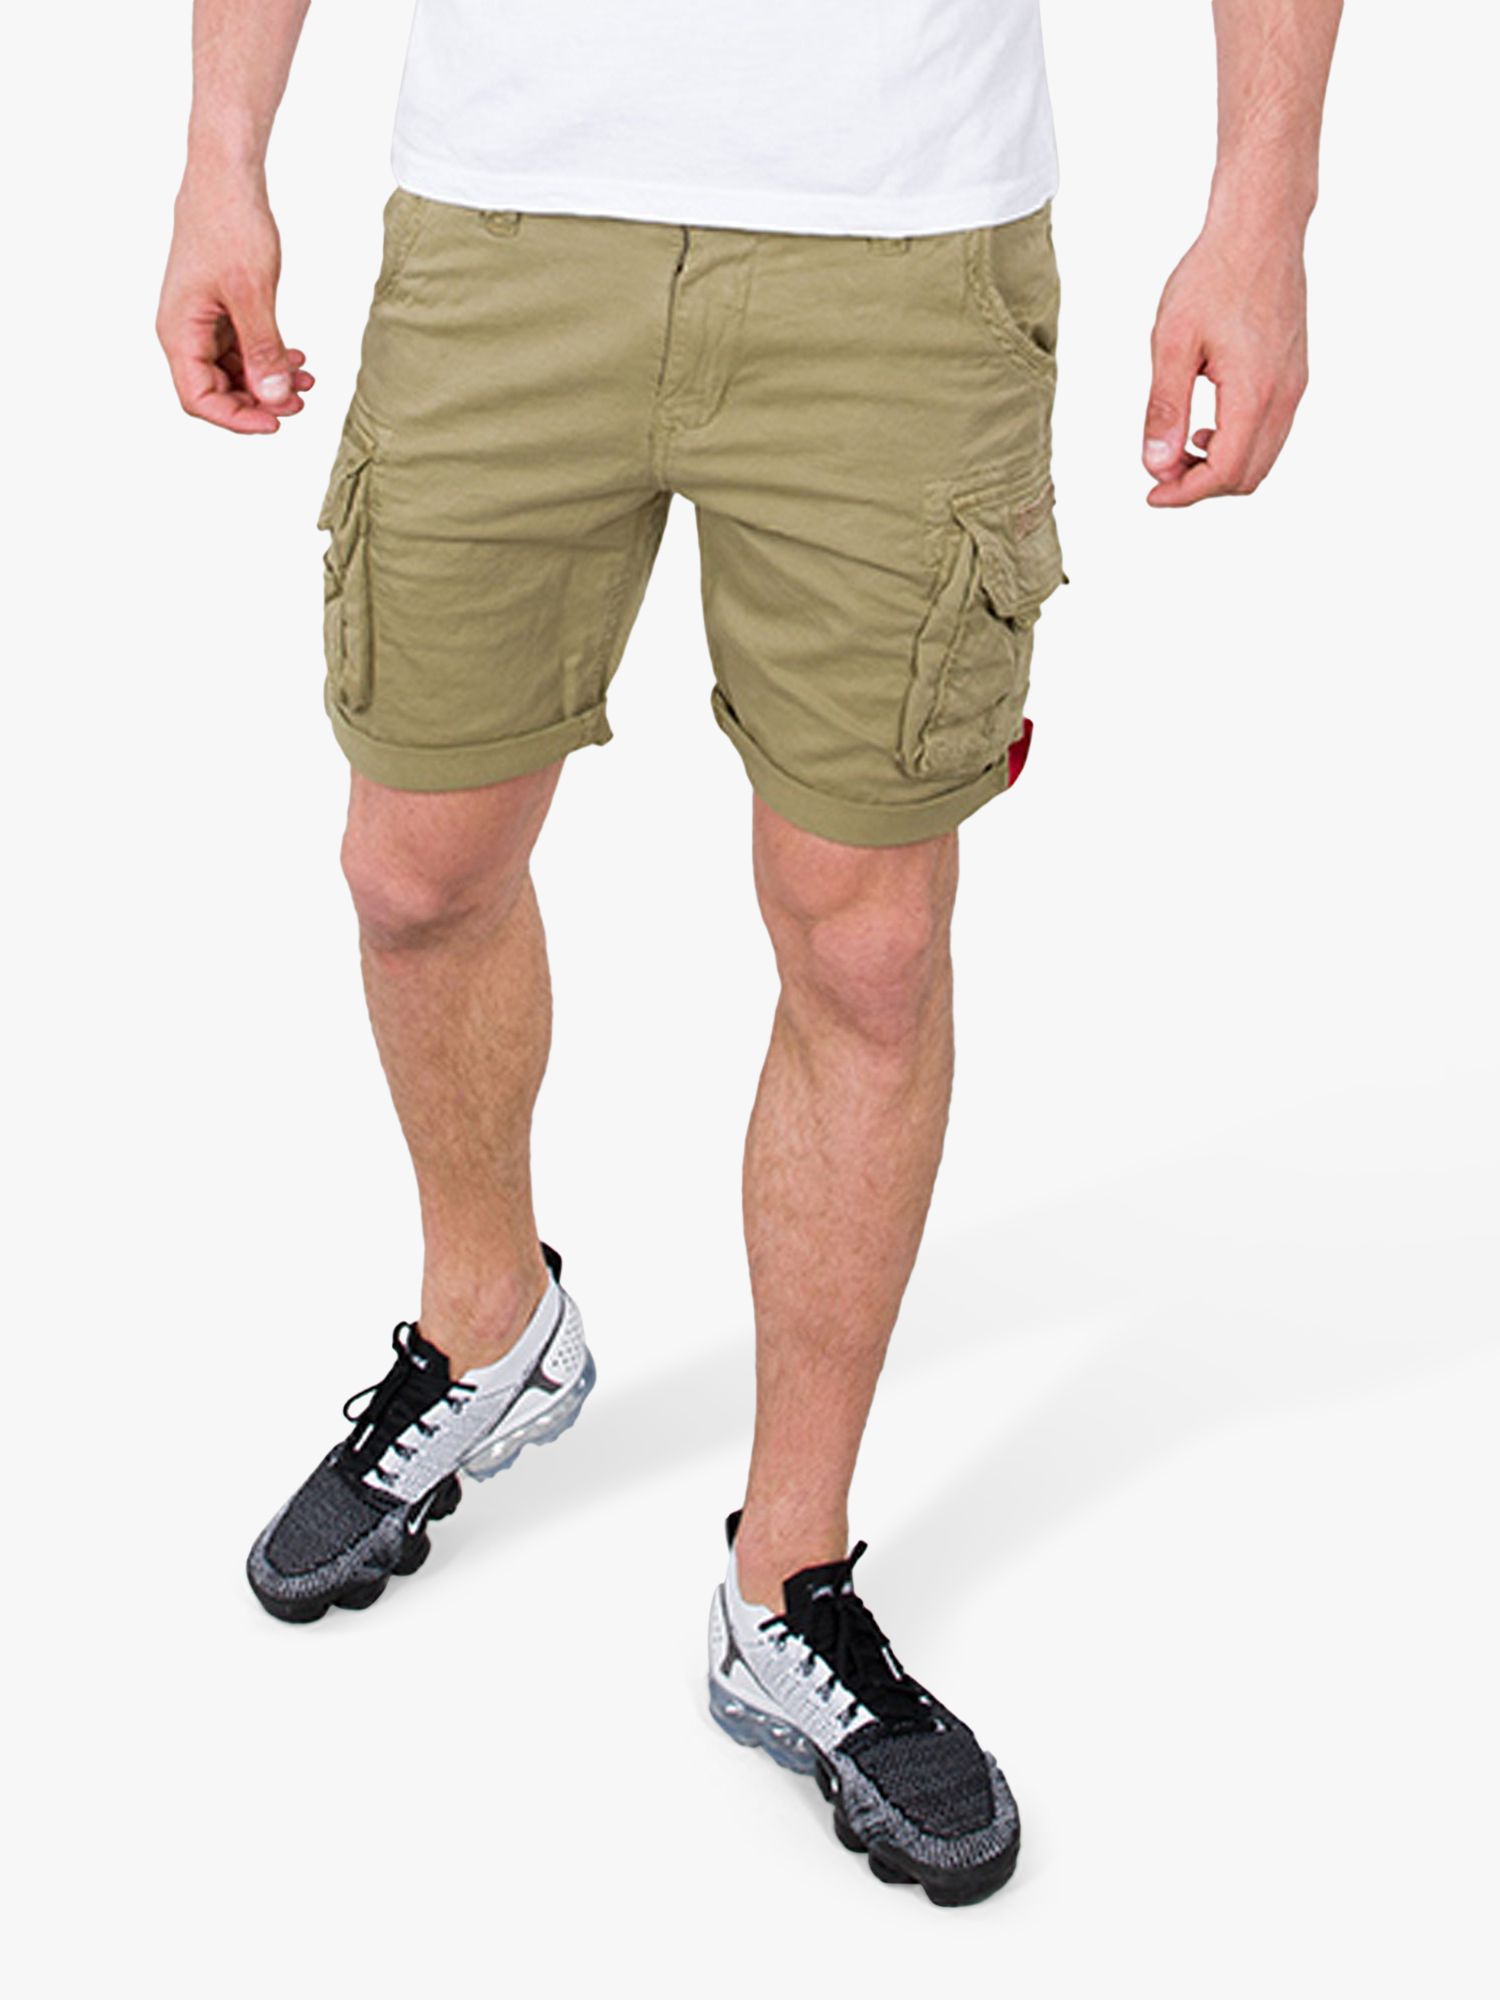 Light Alpha 82 Shorts, Crew Partners Lewis John Olive Cargo & Industries at